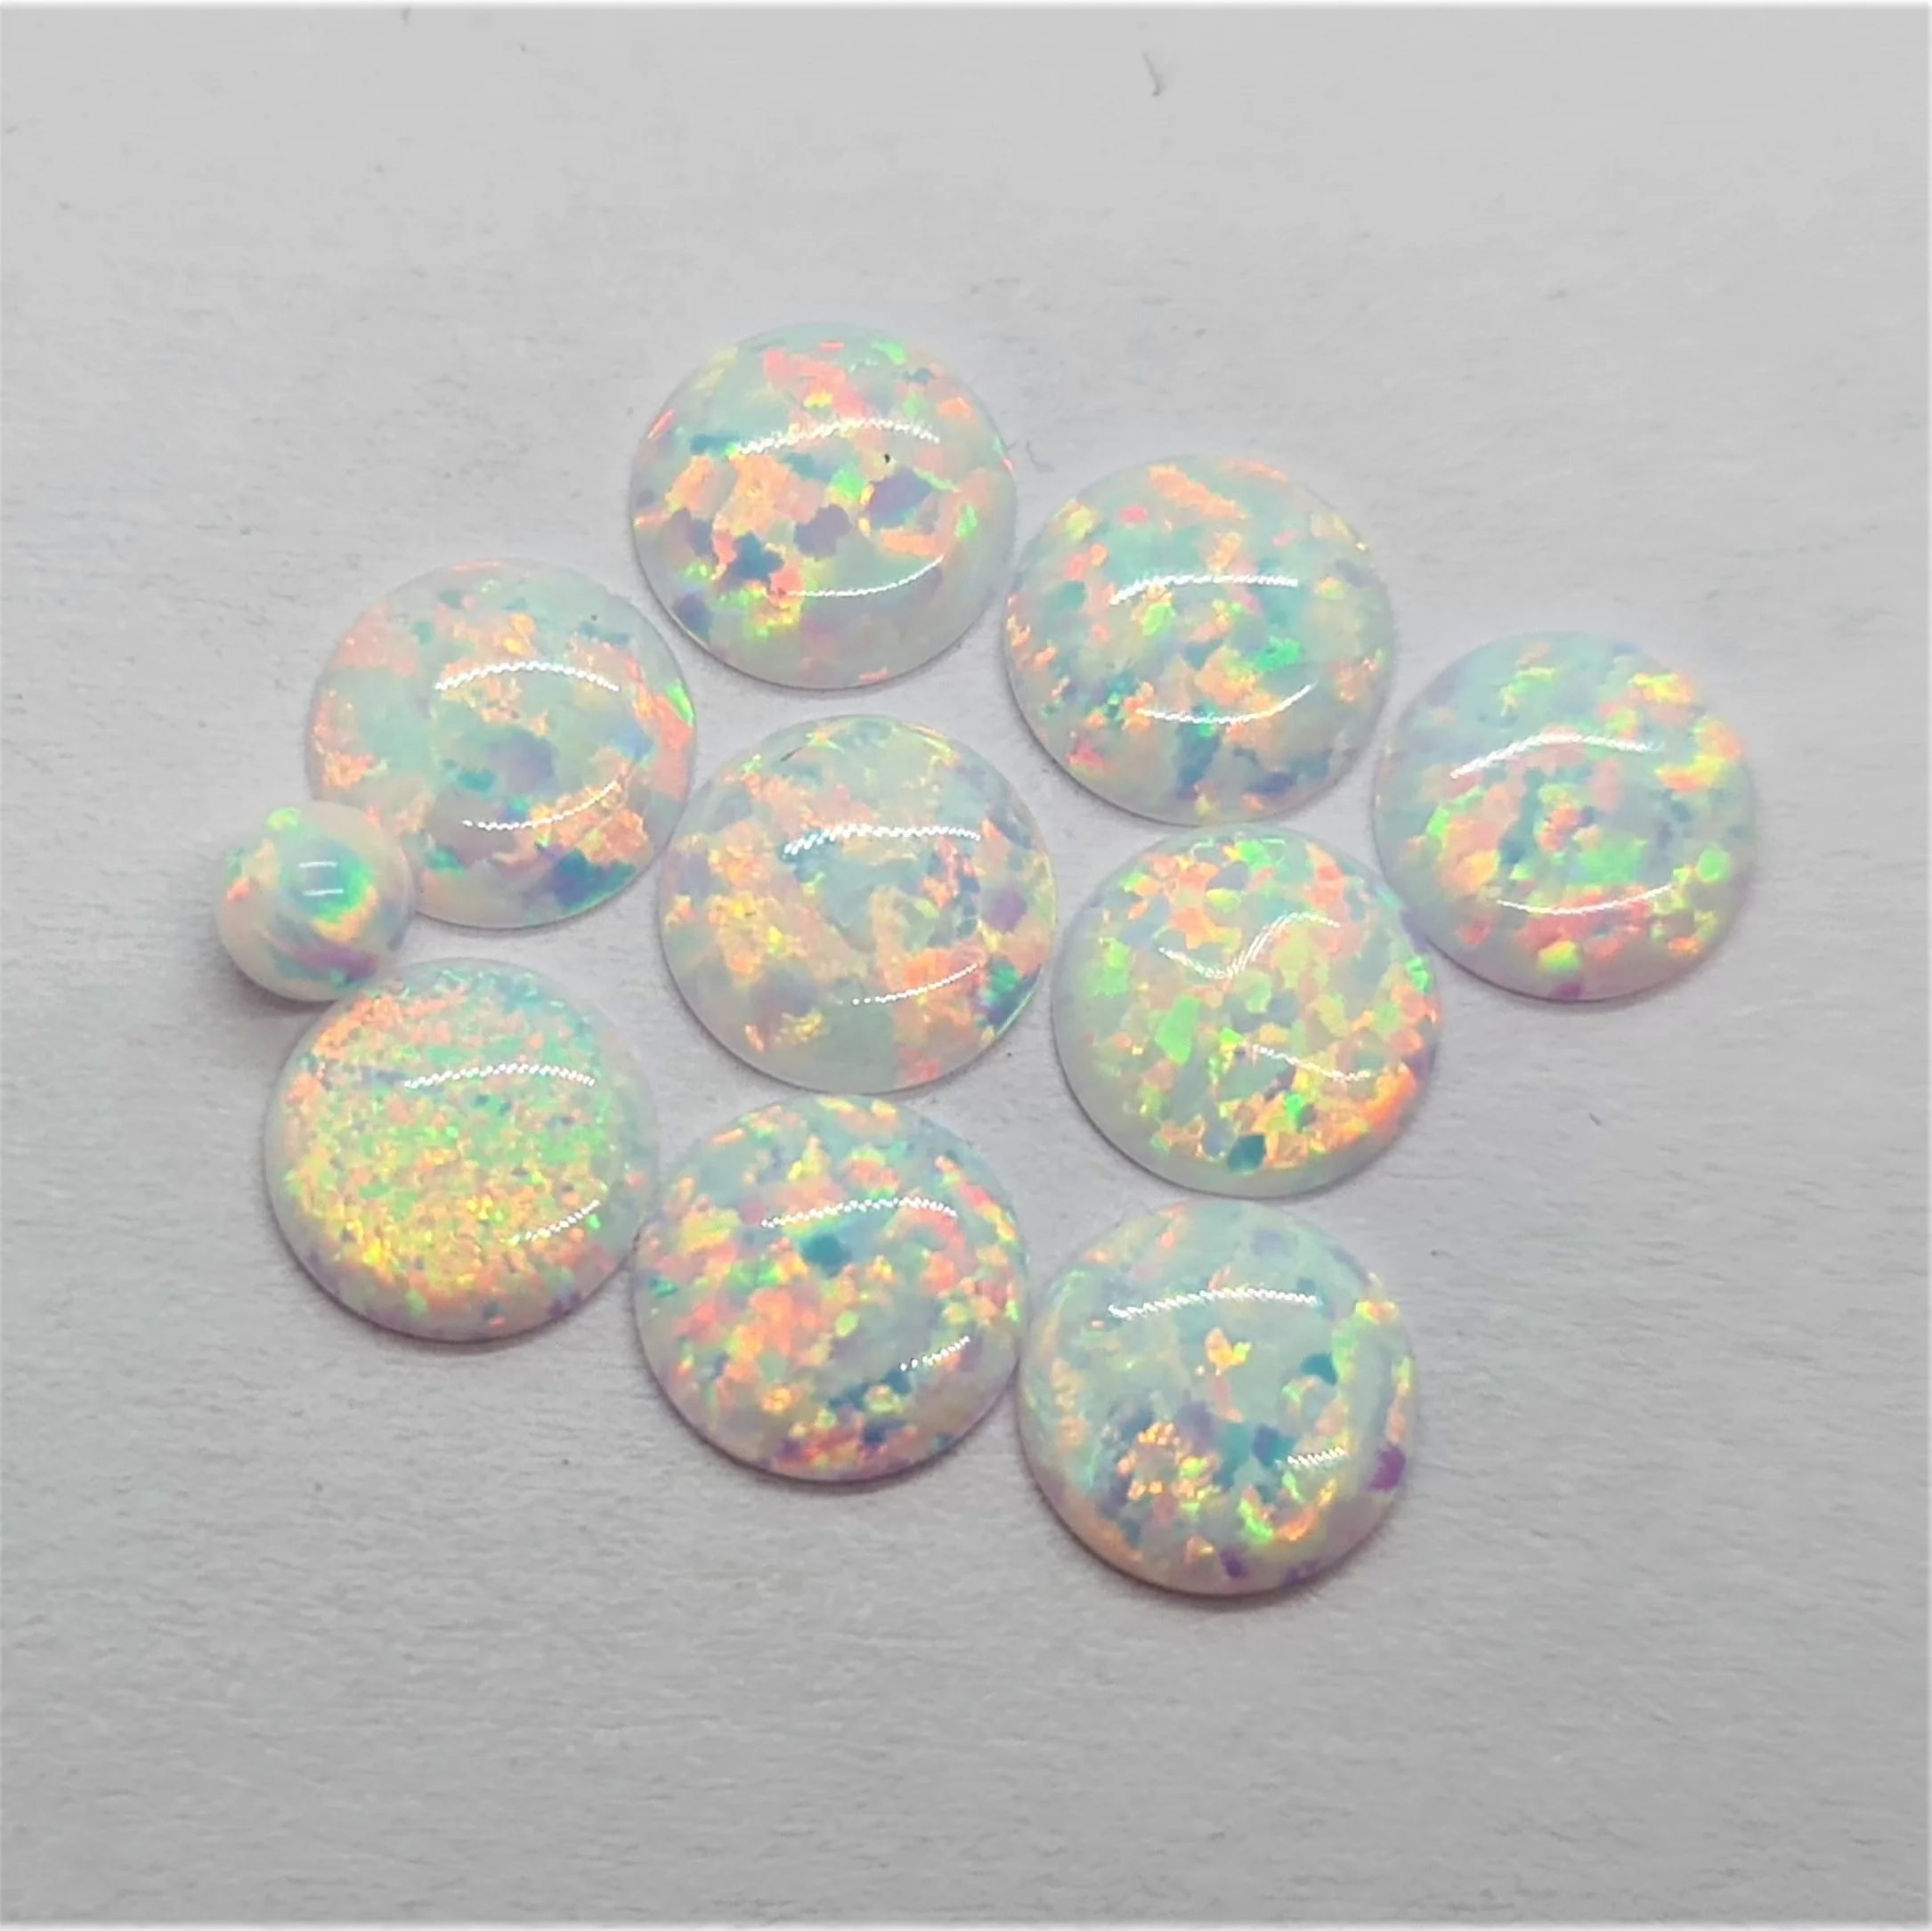 Loose Gemstone Synthetic Opal Ball Shaped Beads cut in all sizes till 15mm in other shapes and sizes as well